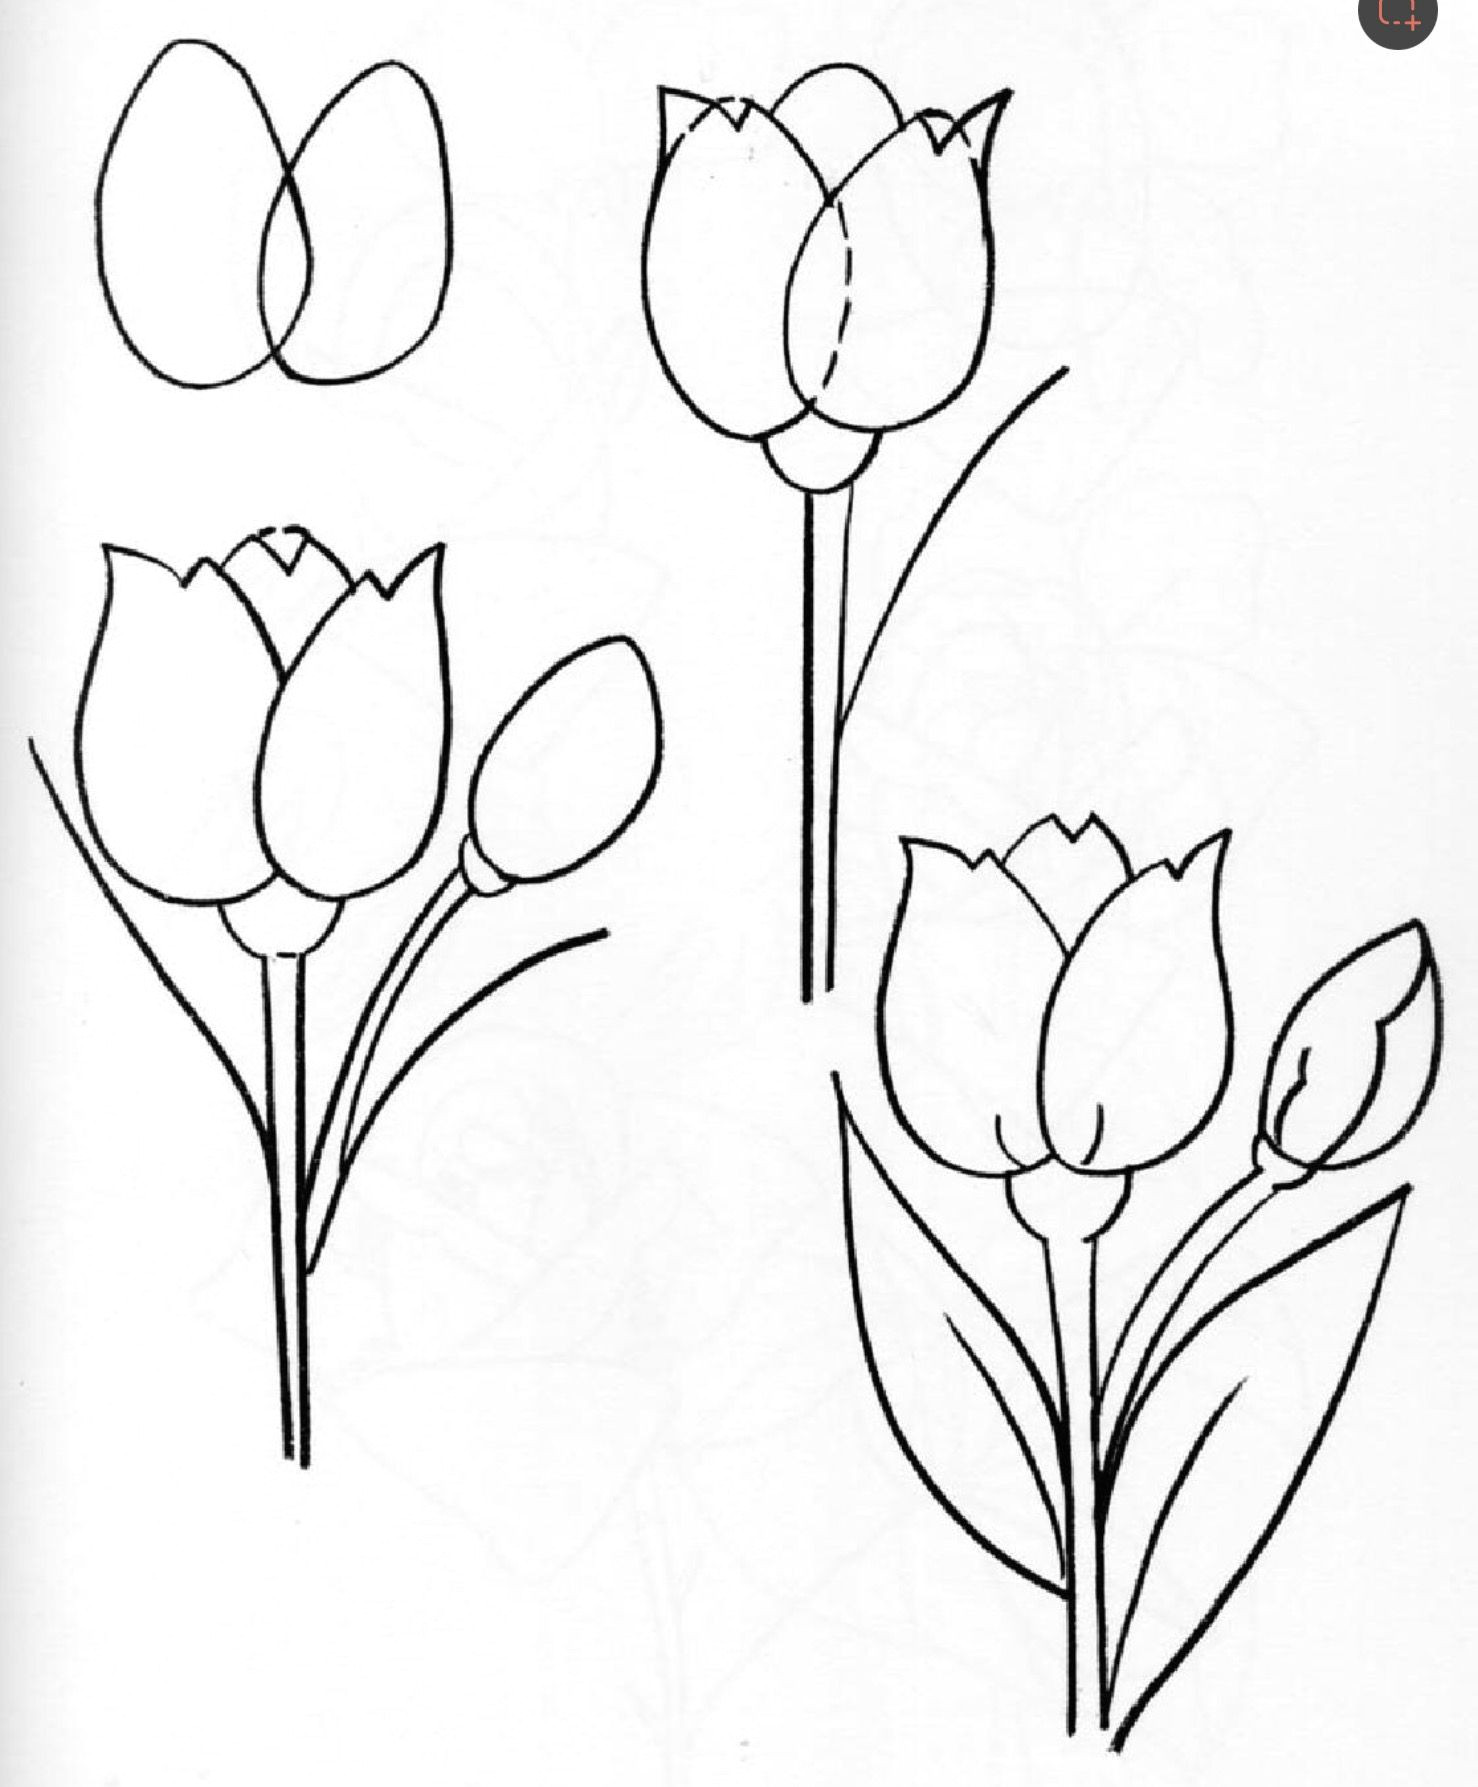 Drawings Of Flower Buds Pin by Jill Smith On Sketch for Watercolour Pinterest Doodles